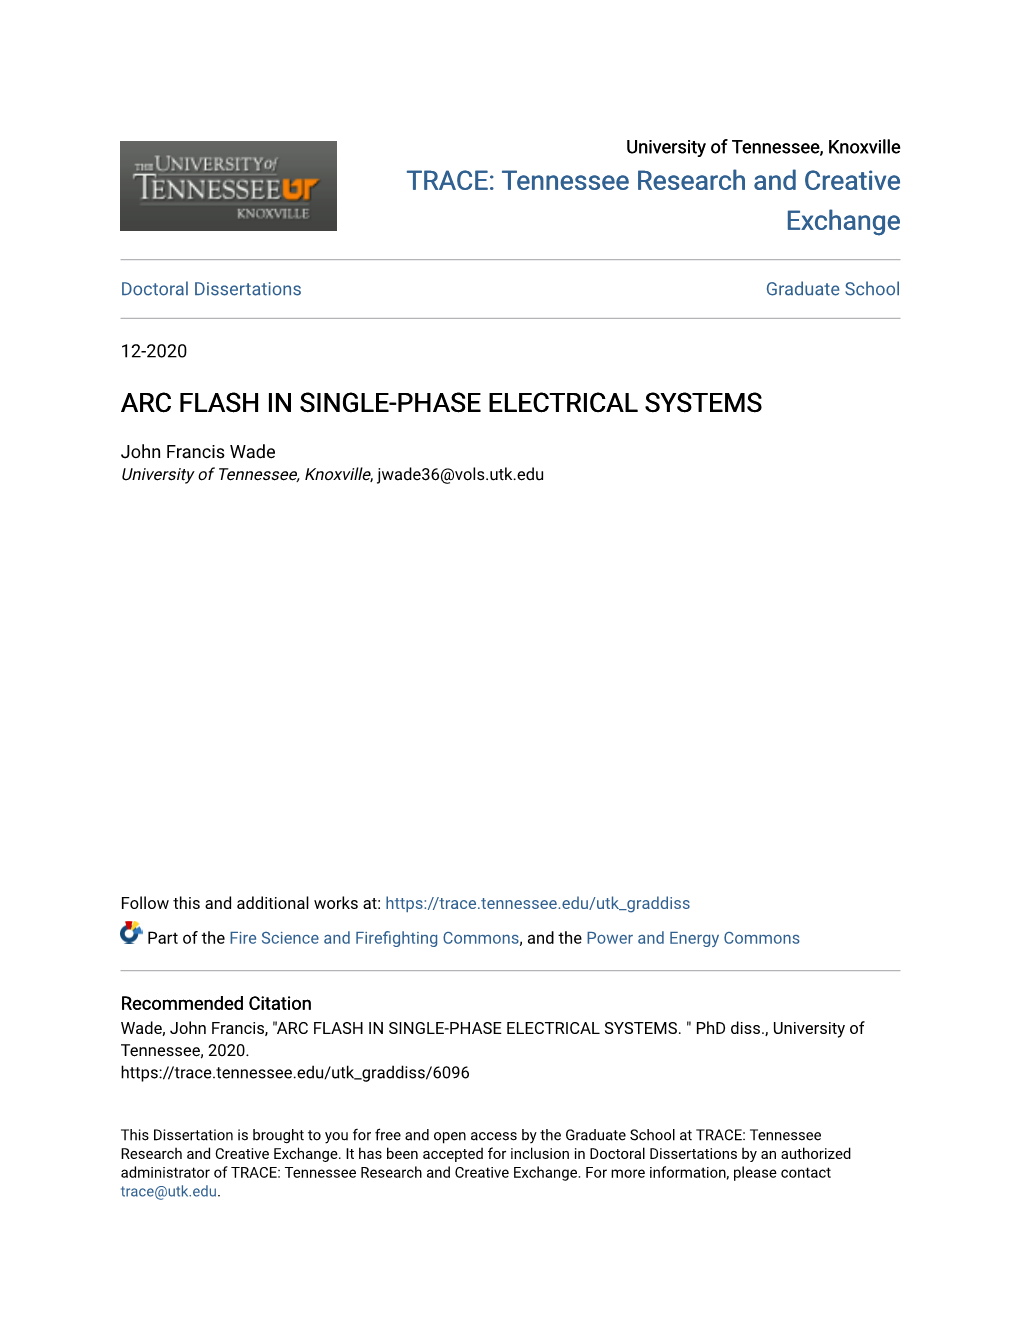 Arc Flash in Single-Phase Electrical Systems